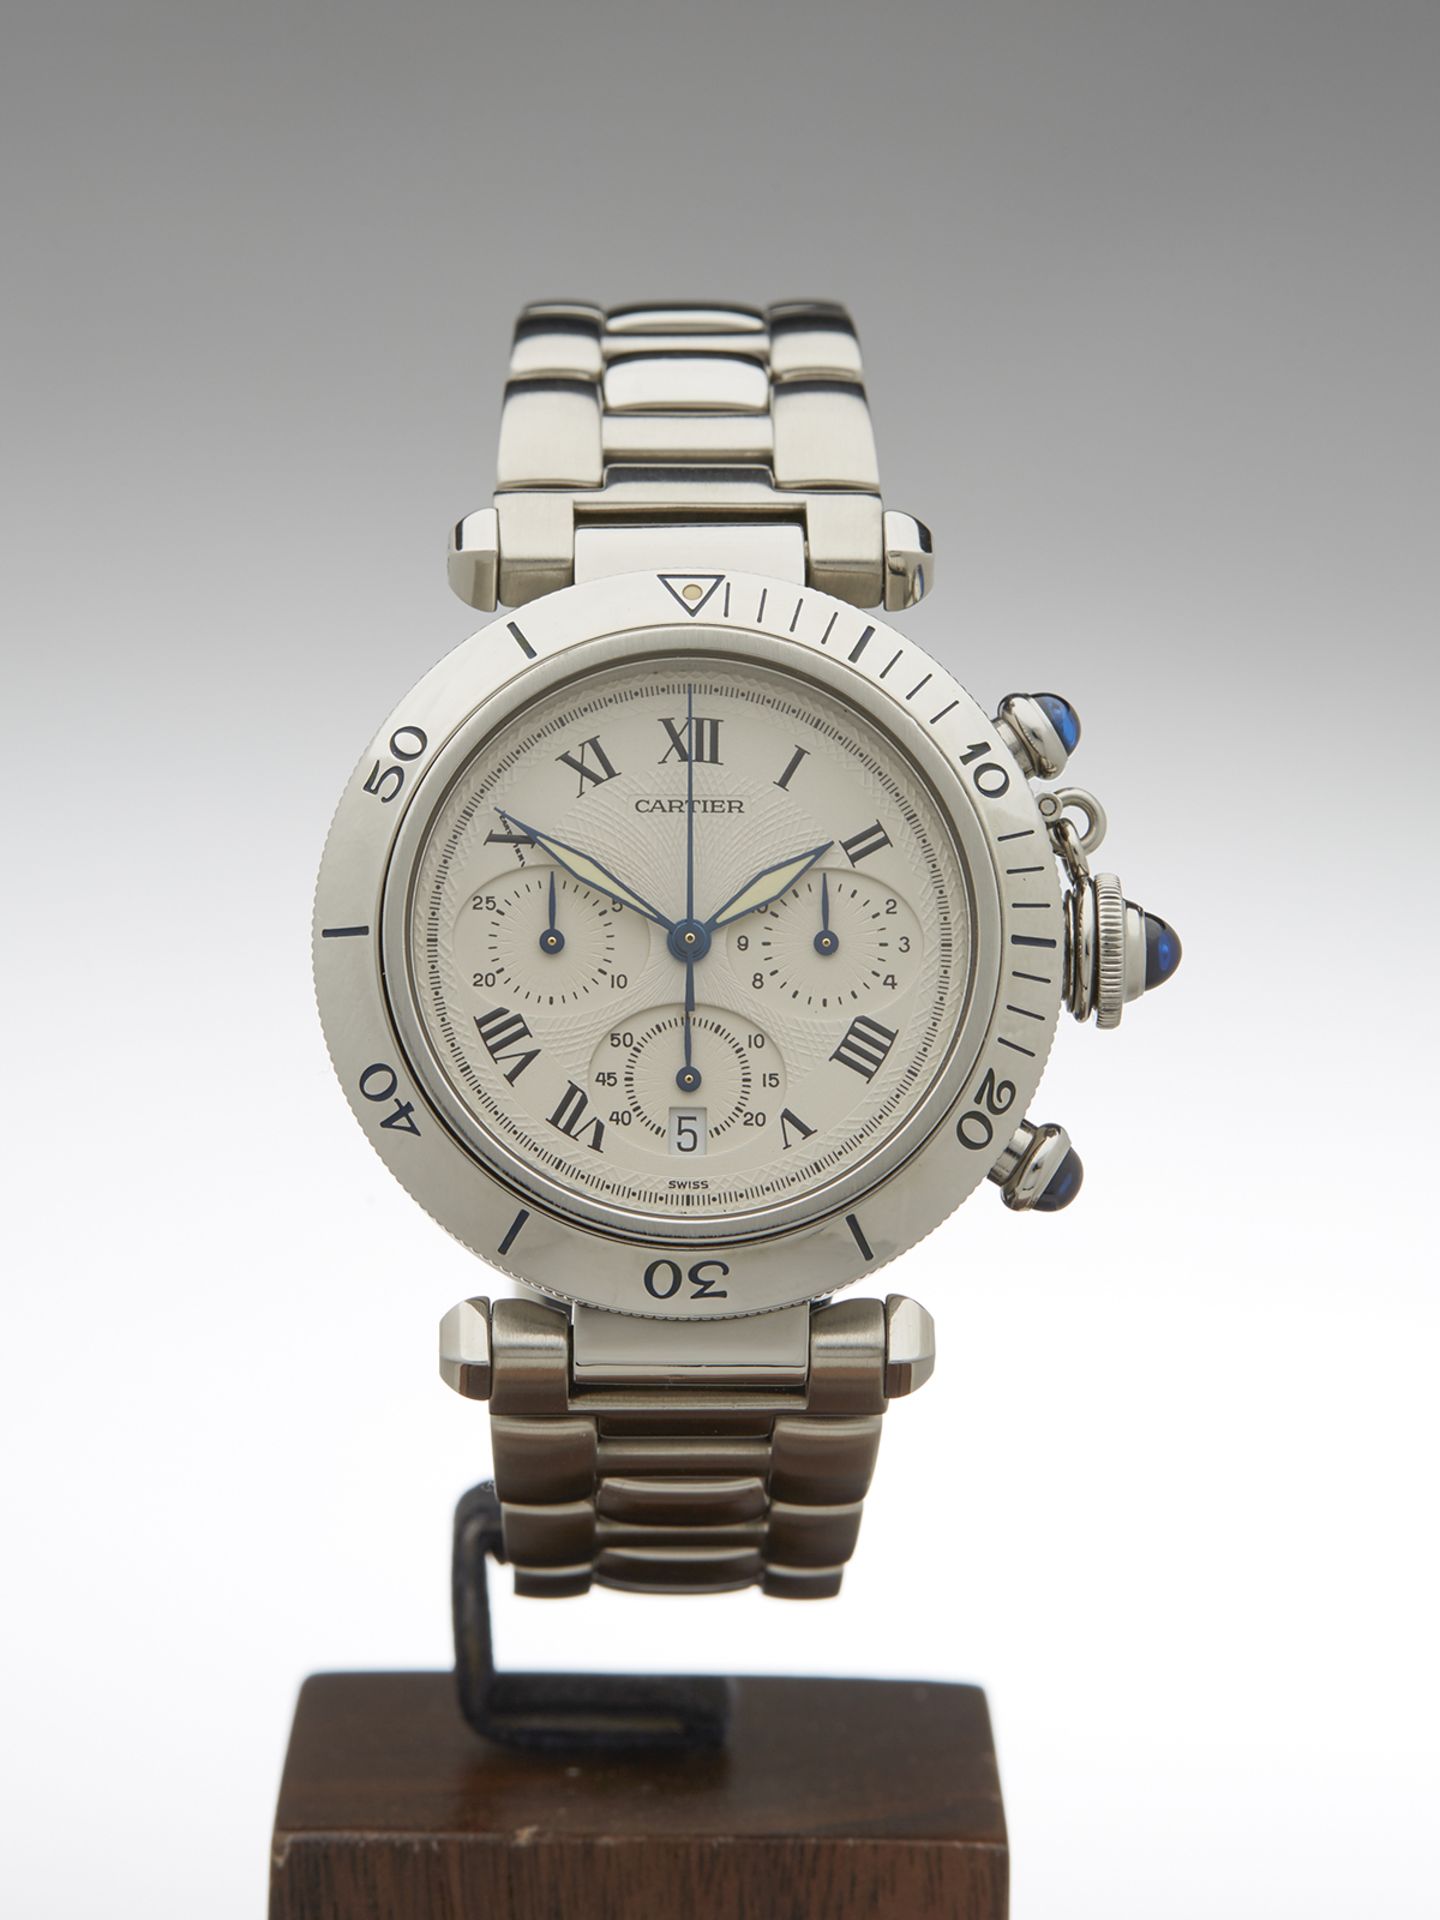 Cartier, Pasha Chronograph SS/SS 39mm Stainless Steel 1050 - Image 3 of 8